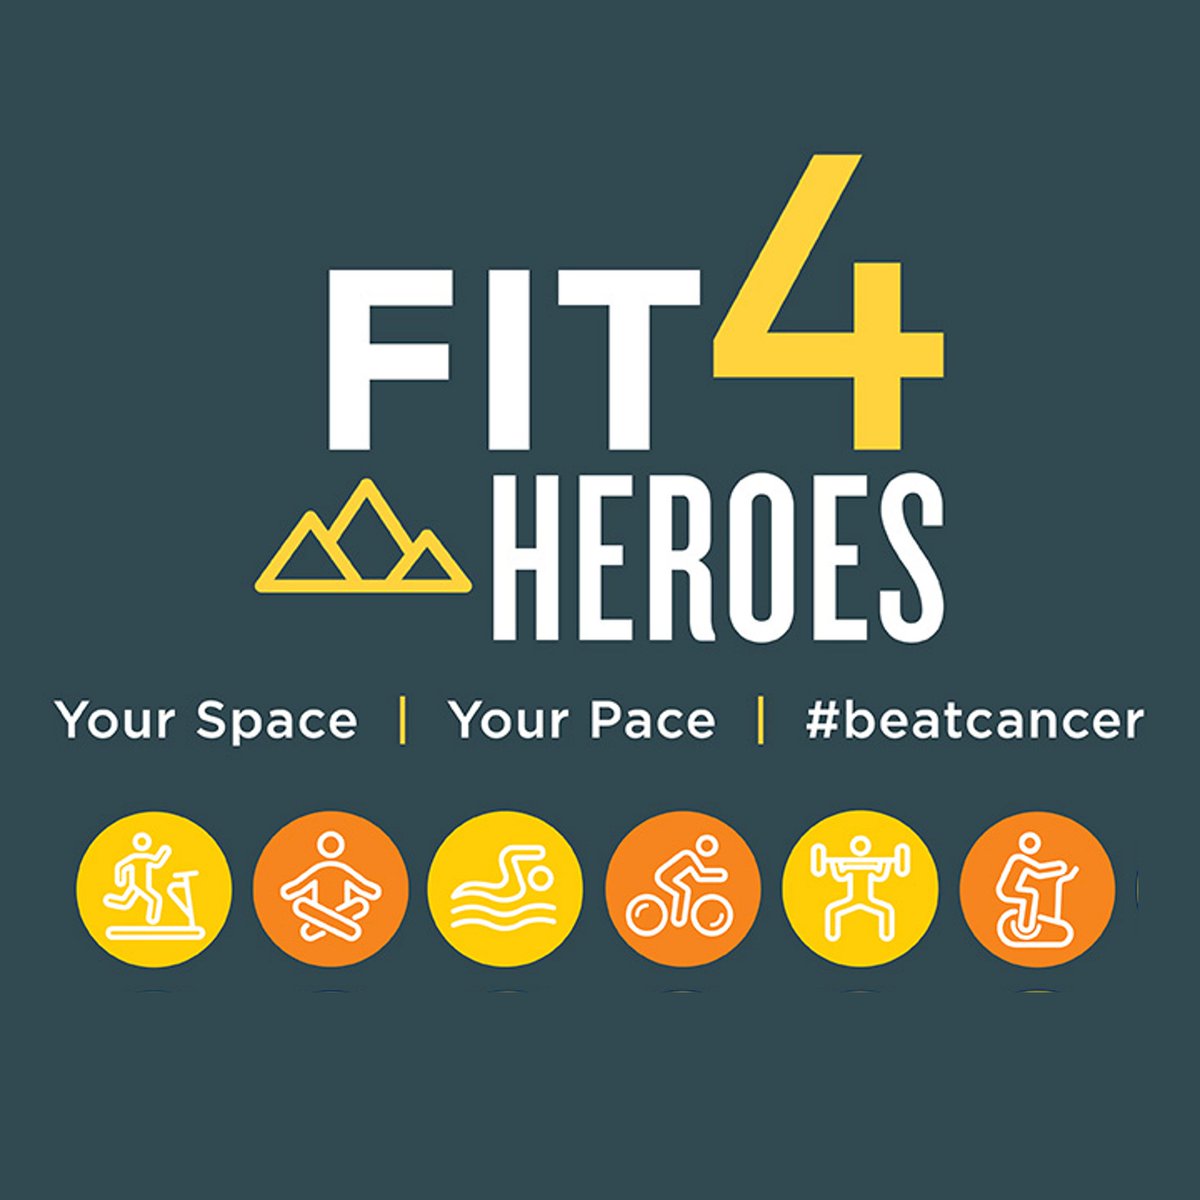 Are you signed up for #Fit4Heroes, Powered by @BrookfieldGroup? This is your chance to #beatcancer! From June 1-23, participants will have a fundraising page, health goal & can even create a team. Sign up at fit4heroes.org. #whyheroes #Fit4Heroes2024 #CancerPrevention